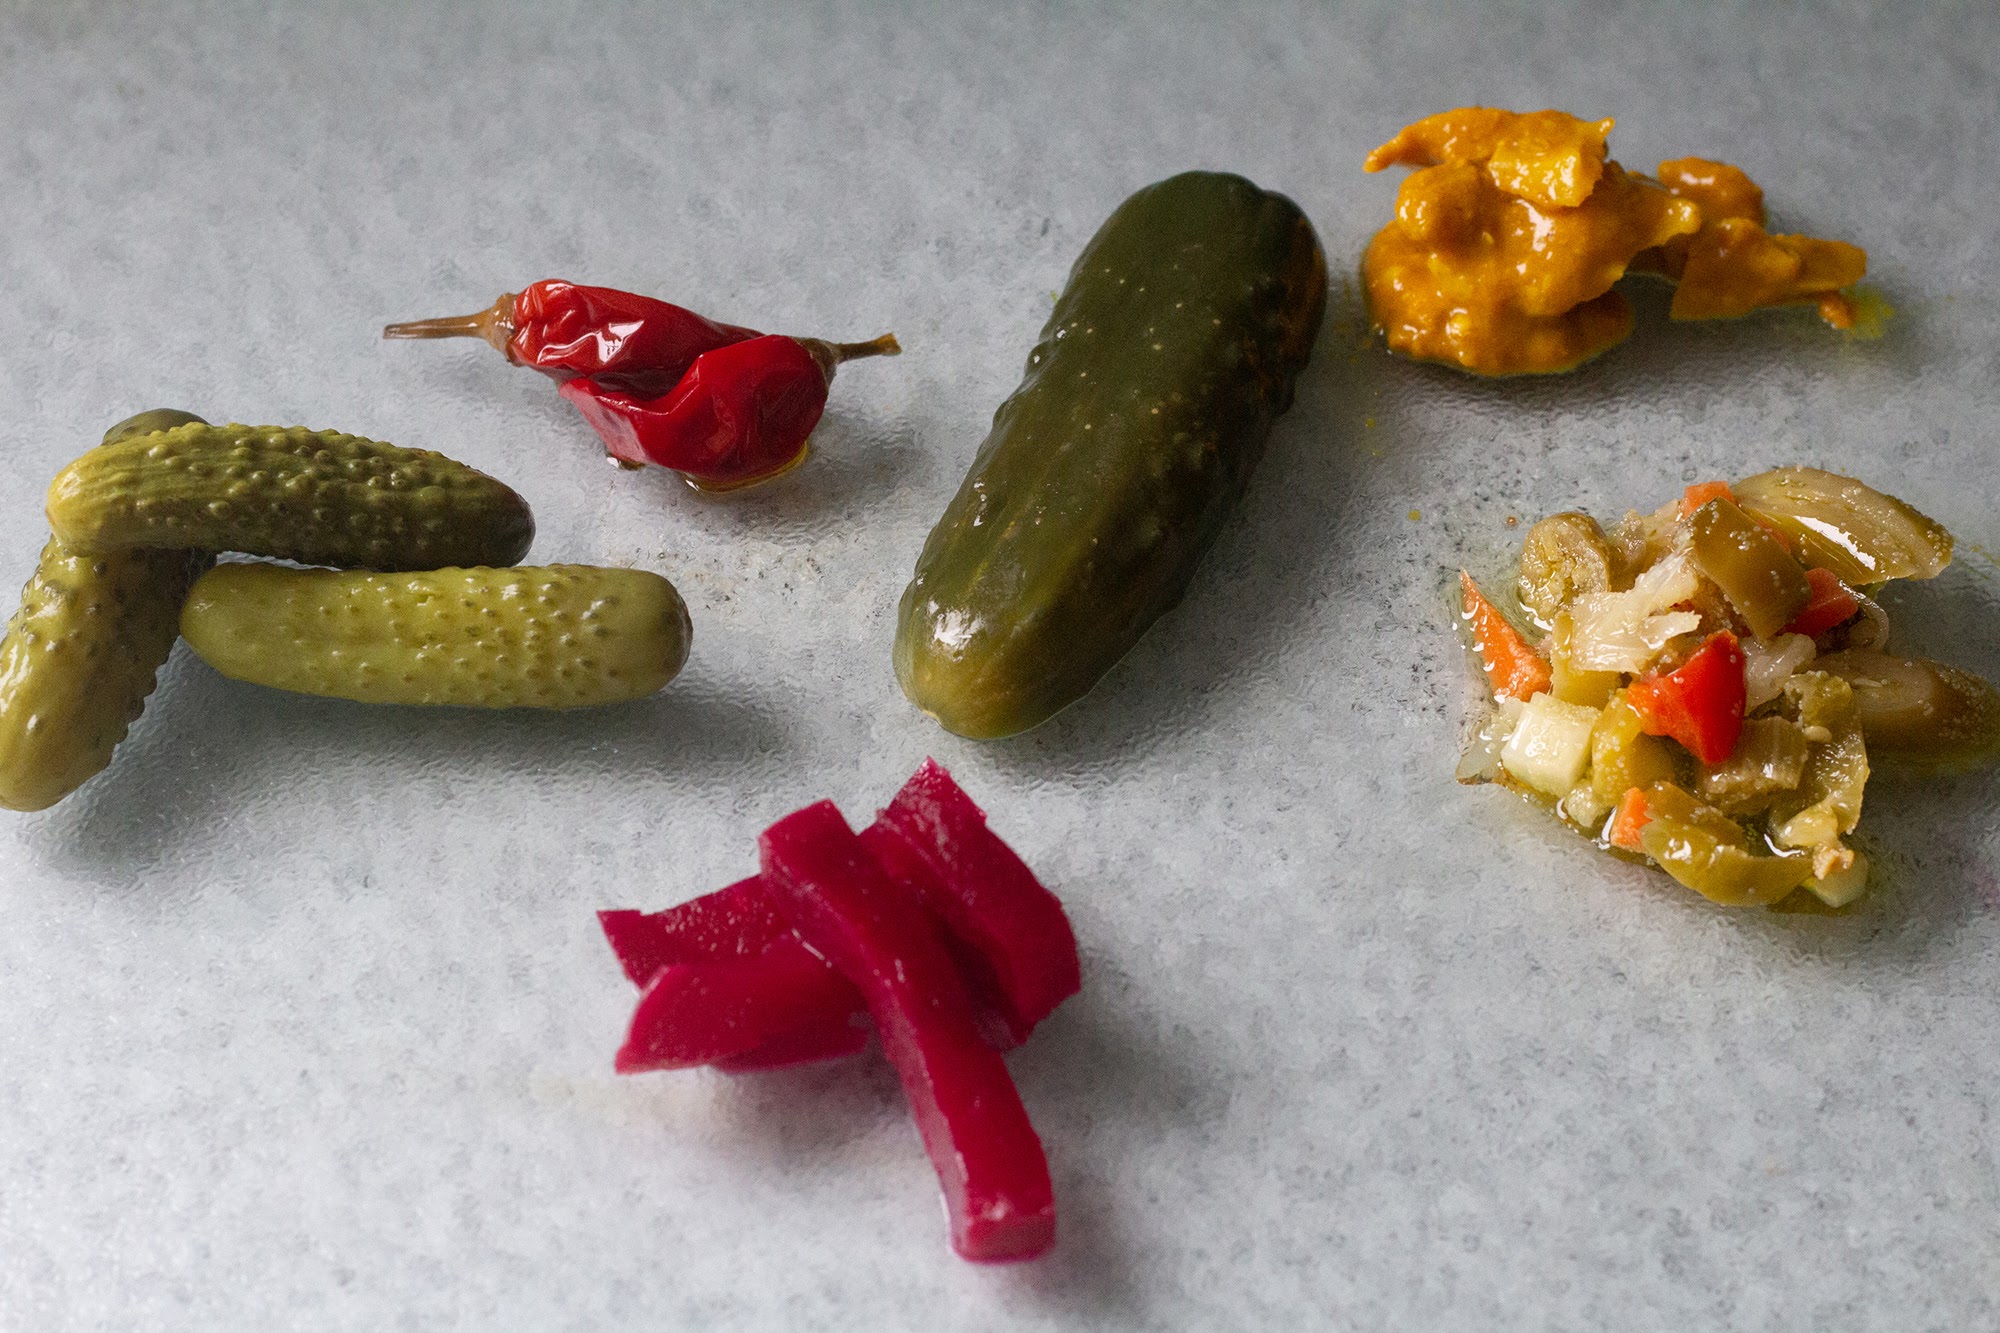 A spread of pickled vegetables laid out on a slate counter